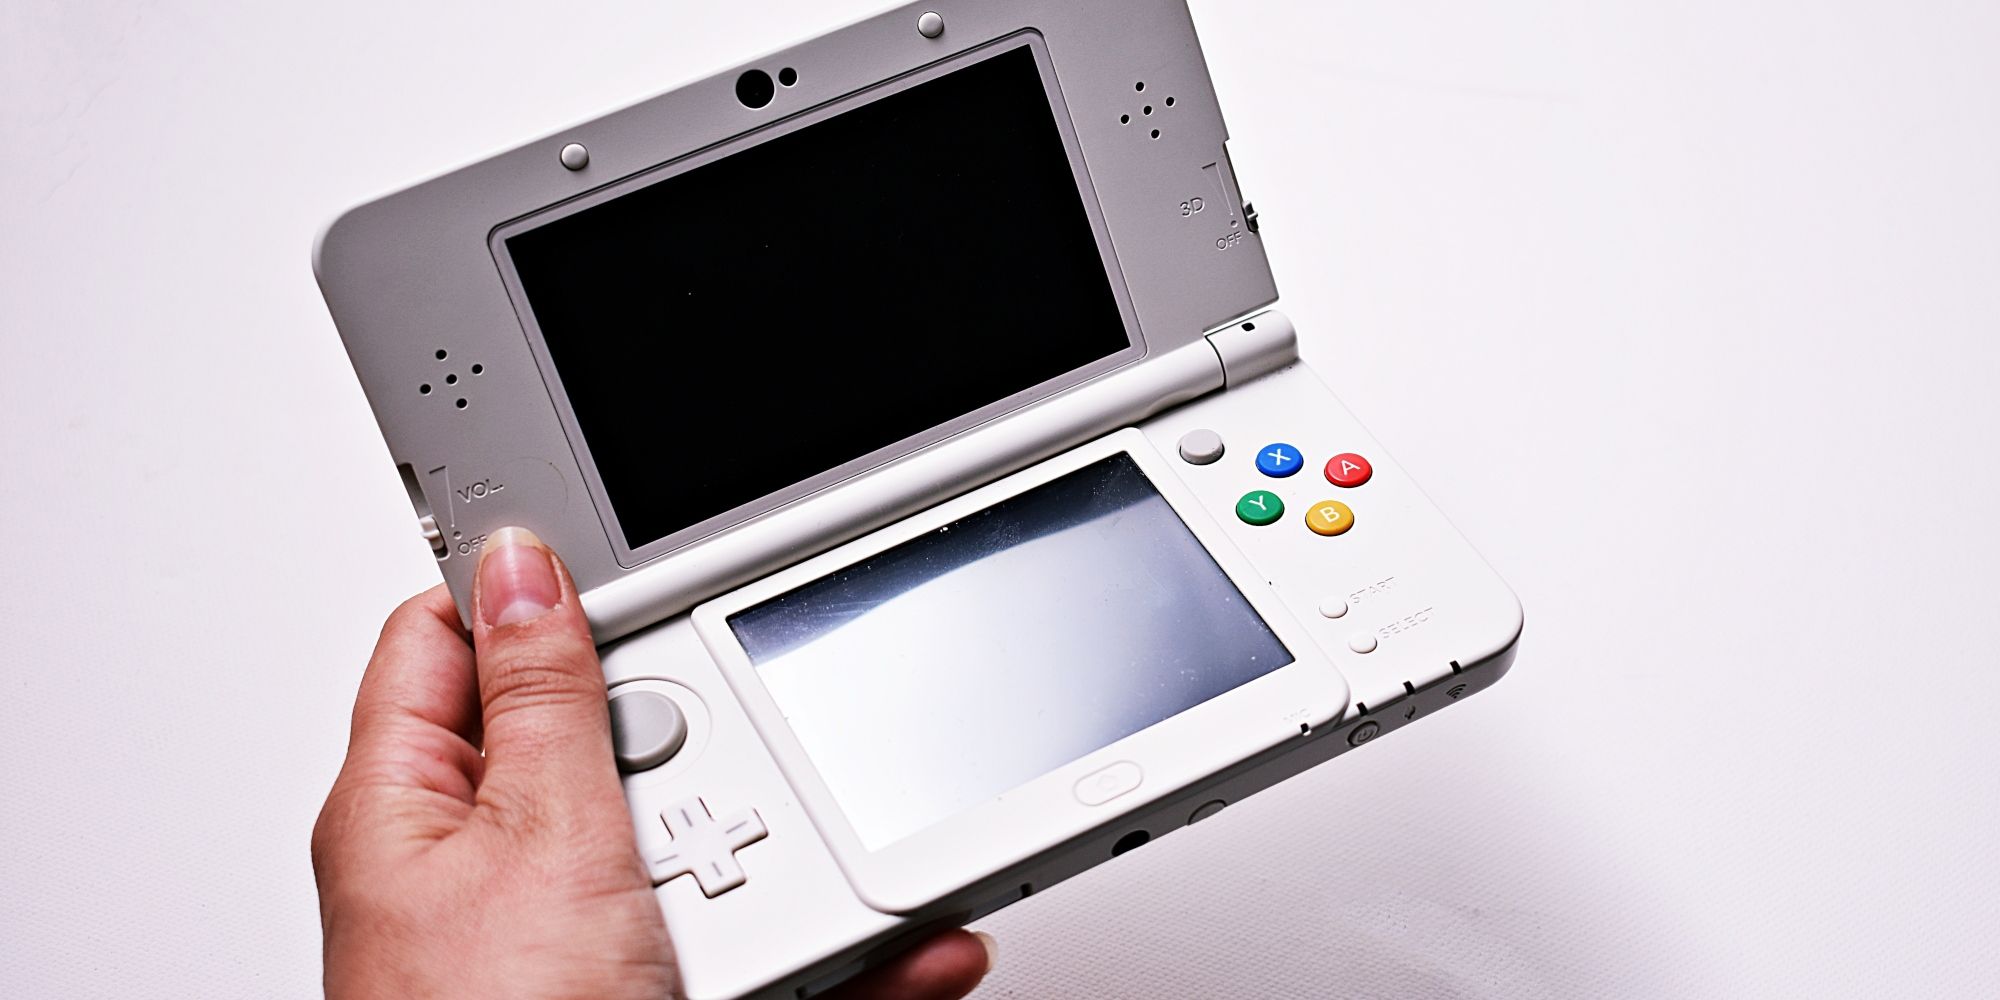 A person's left hand holding a Nintendo 3DS in front of a white background.